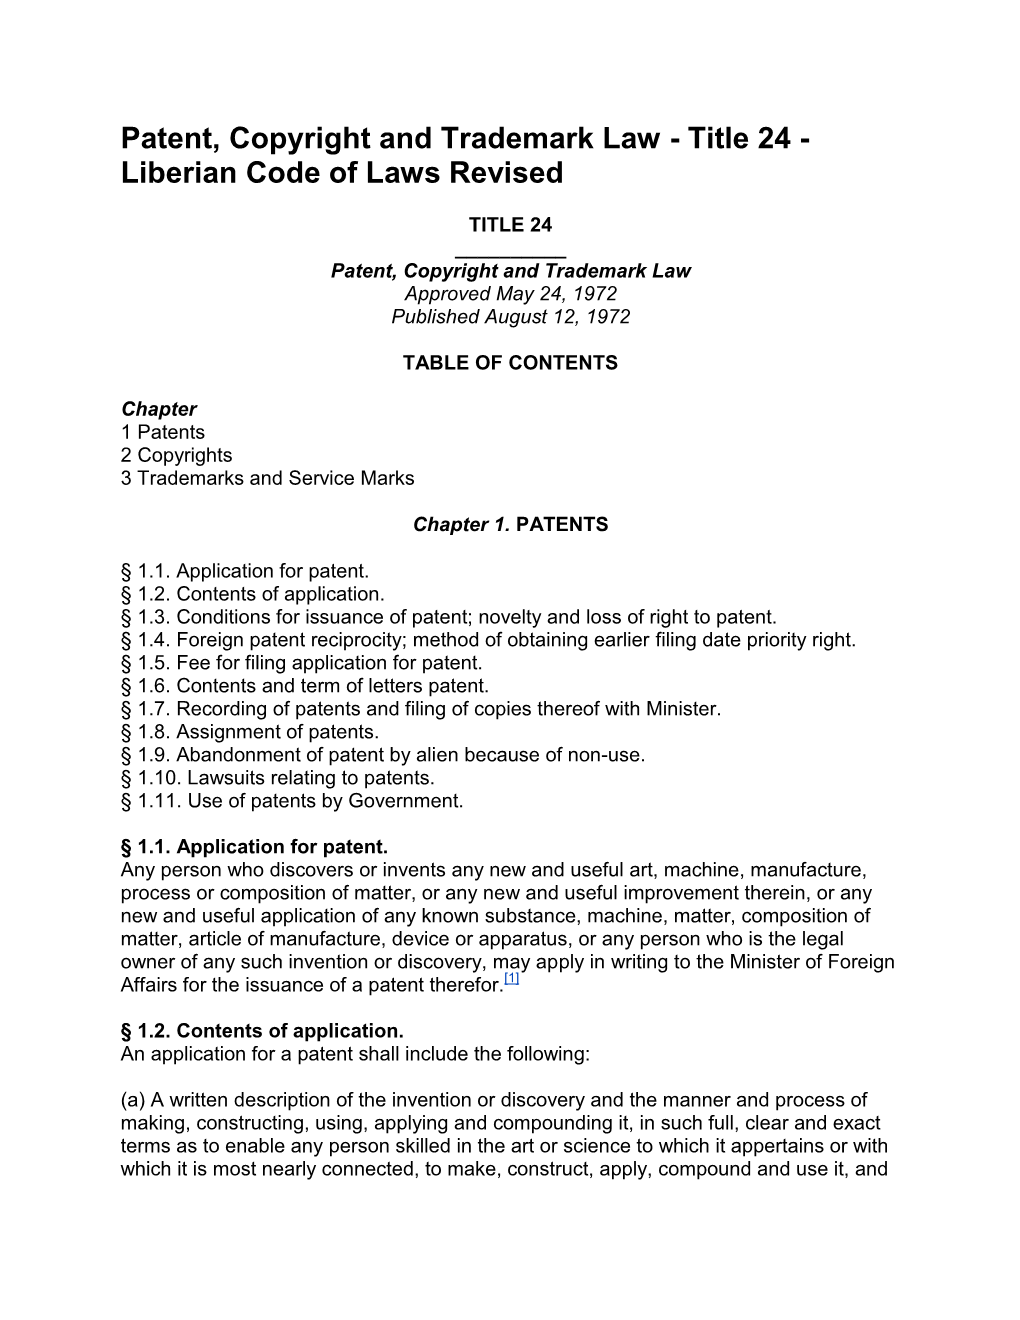 Patent, Copyright and Trademark Law - Title 24 - Liberian Code of Laws Revised